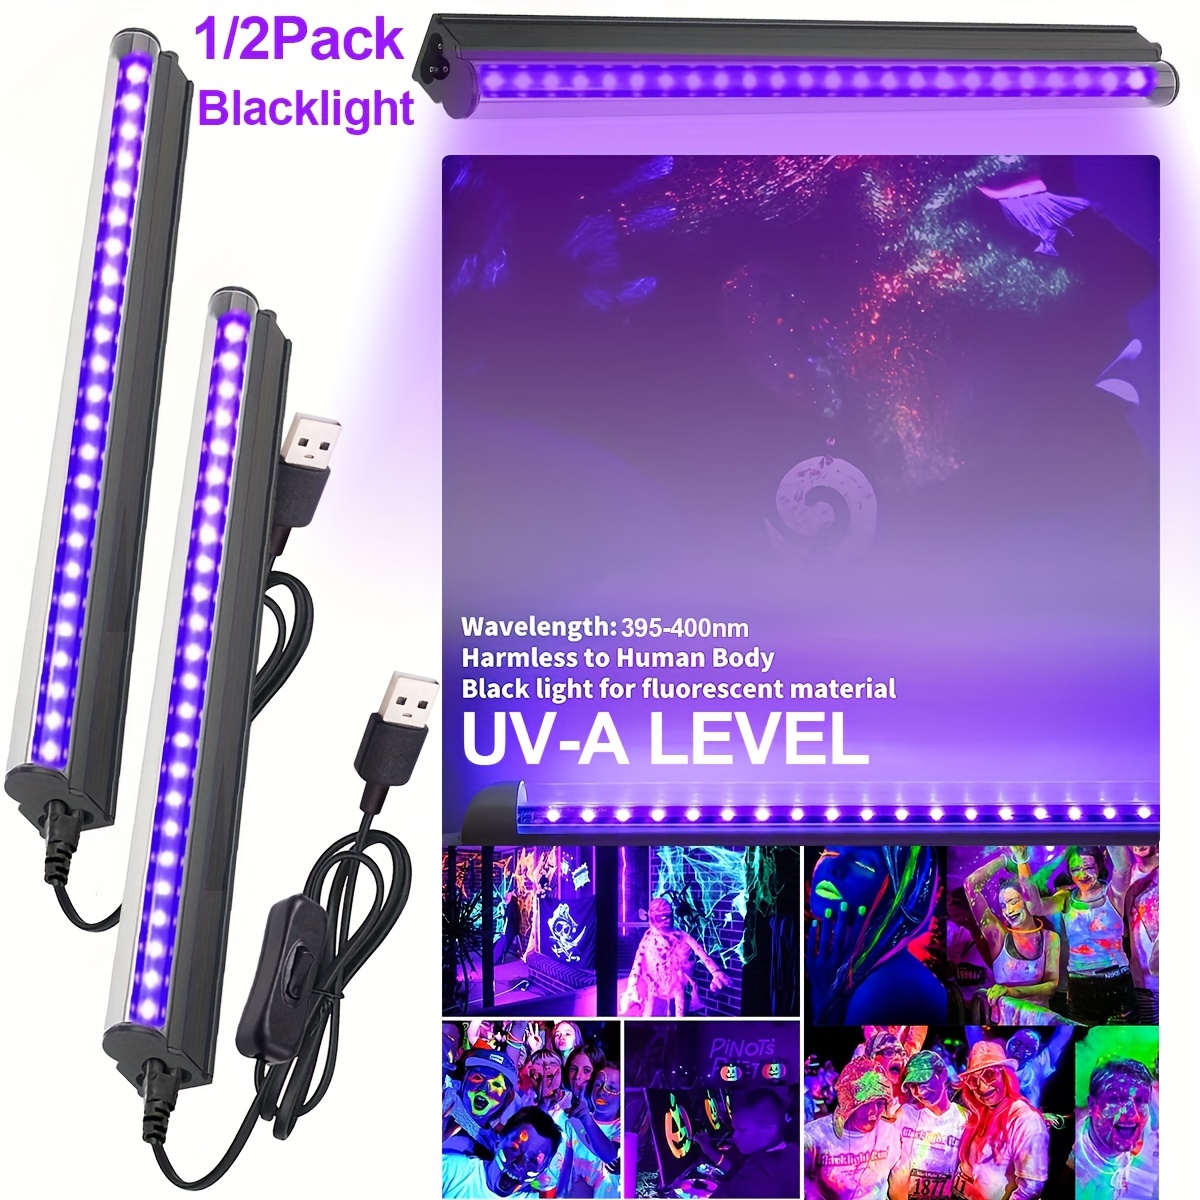 1pc 36W LED Black Light, Black Lights For Glow Party, Blacklight With Plug,  Each Light Up 22x22ft, Glow Light For Halloween, Bedroom, Fluorescent Body